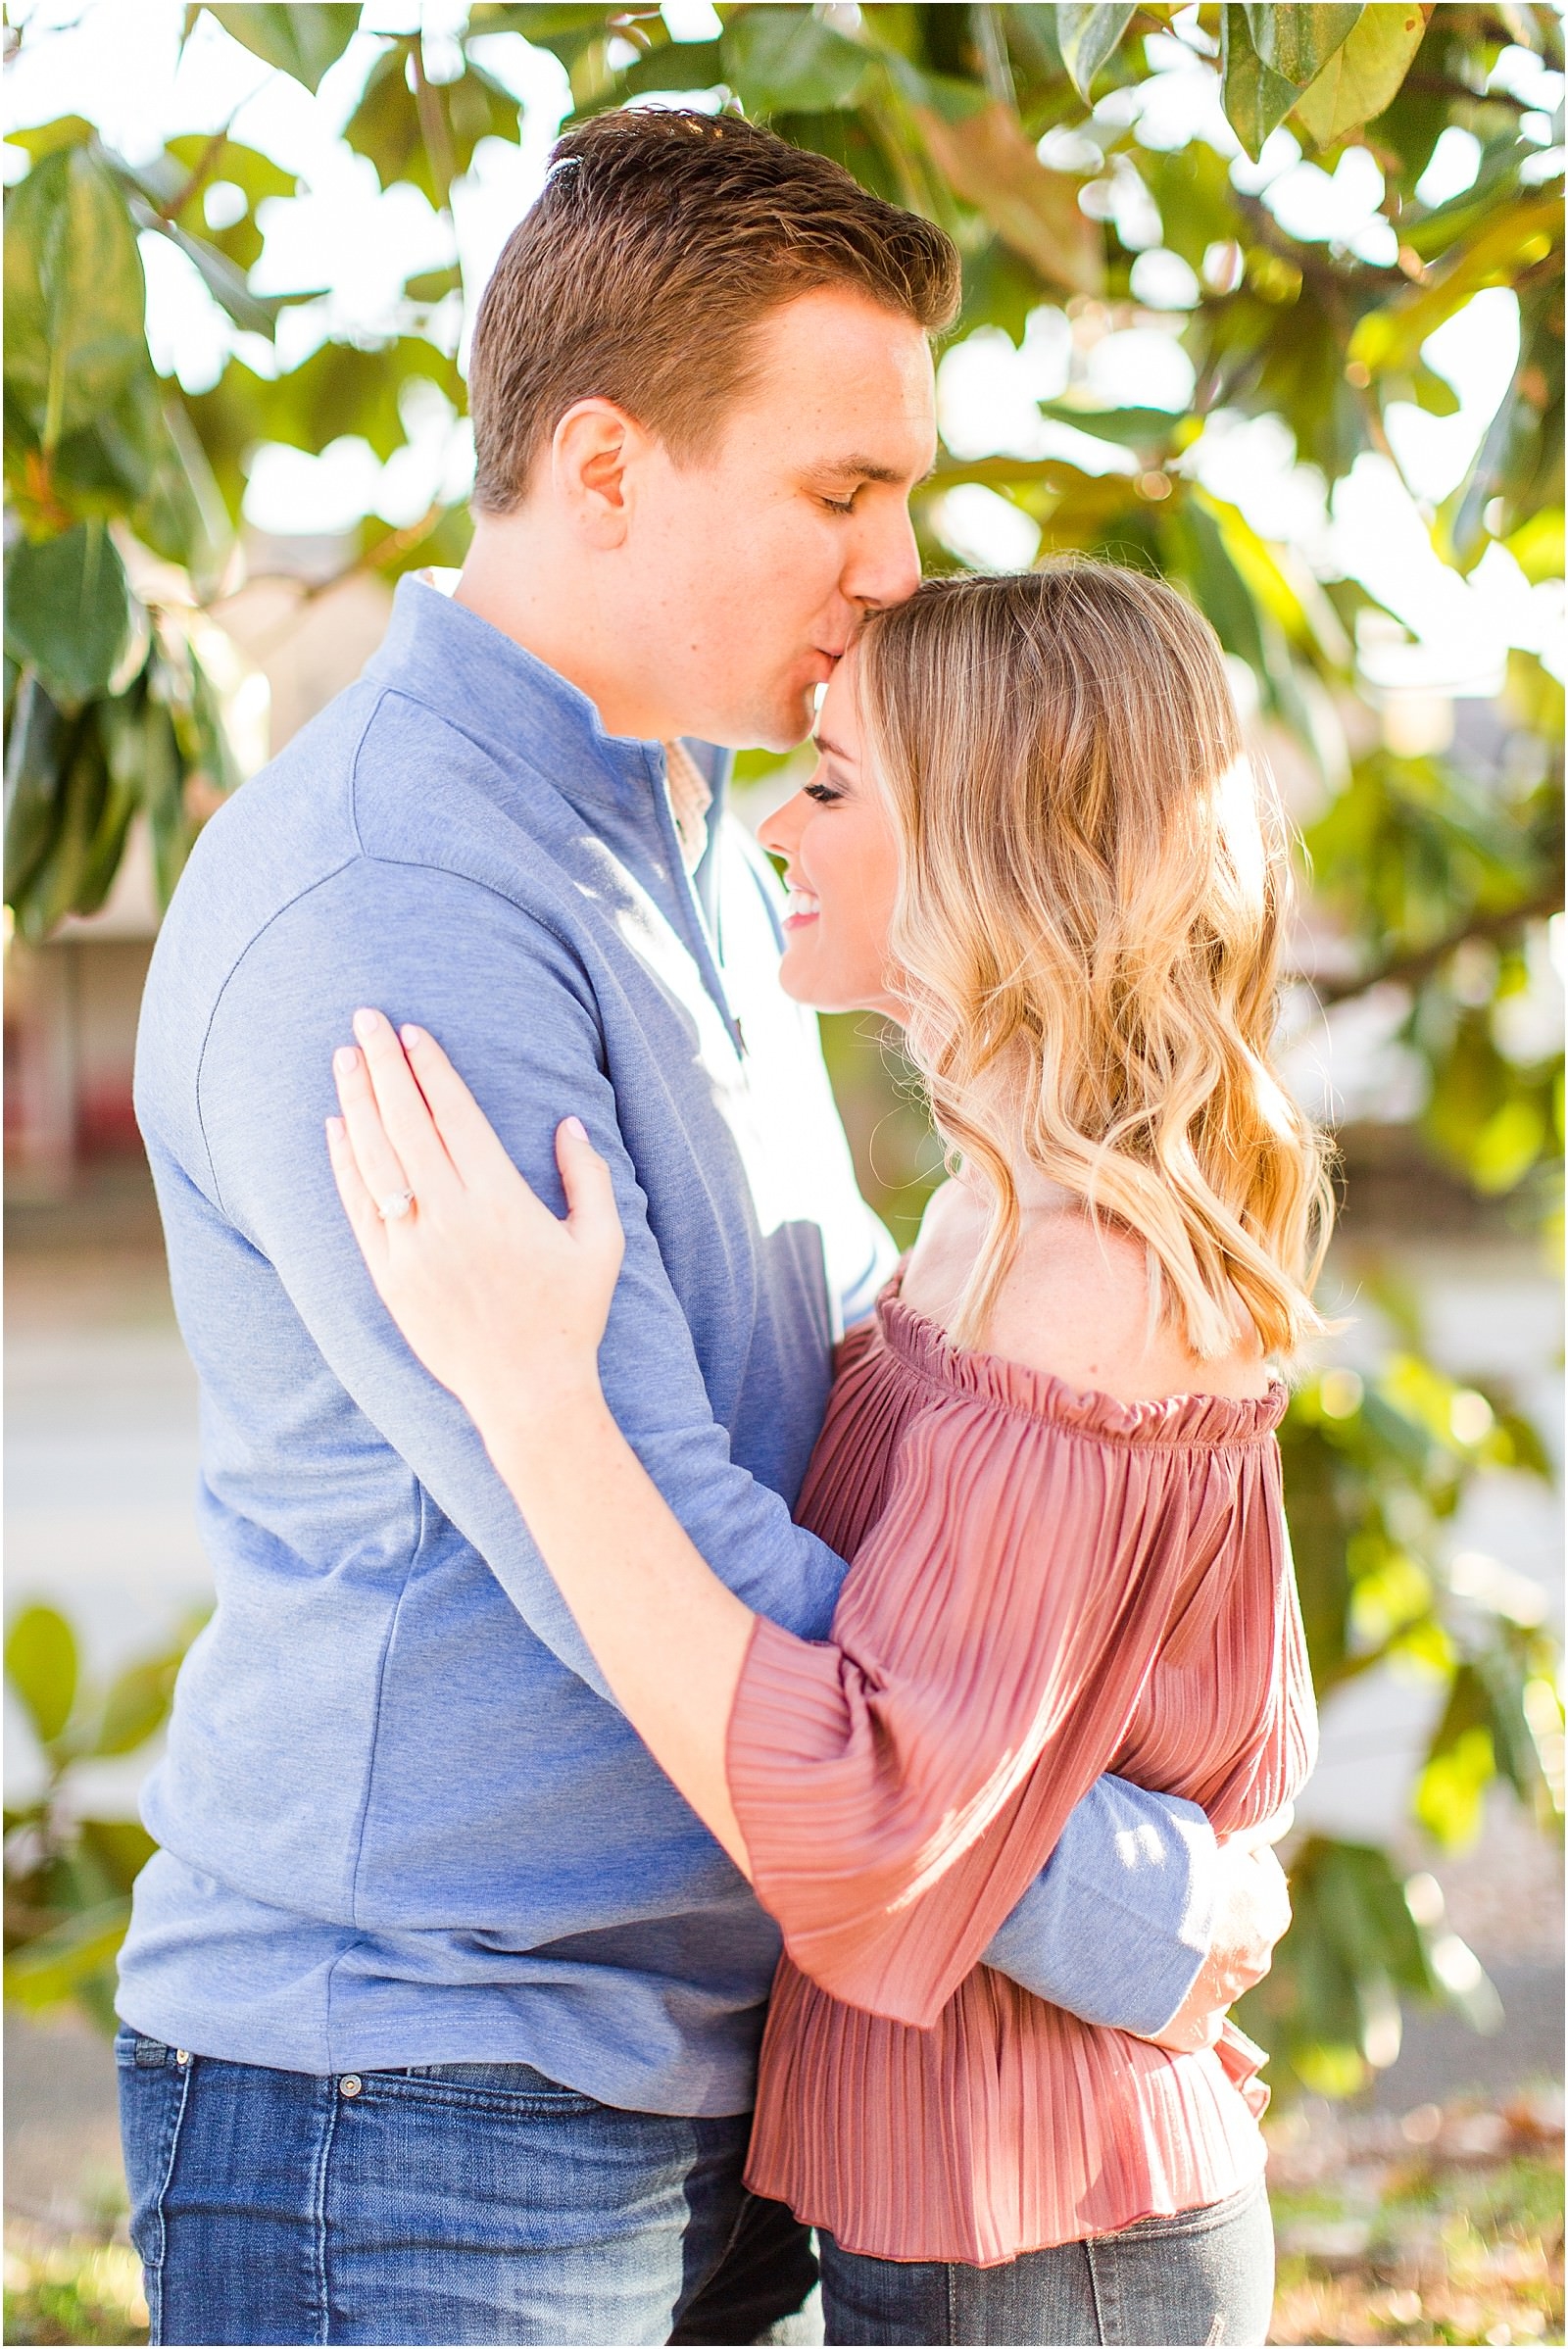 Madison and Christaan | A 20 West Engagement Session in Downto wn Newburgh | Bret and Brandie Photography035.jpg